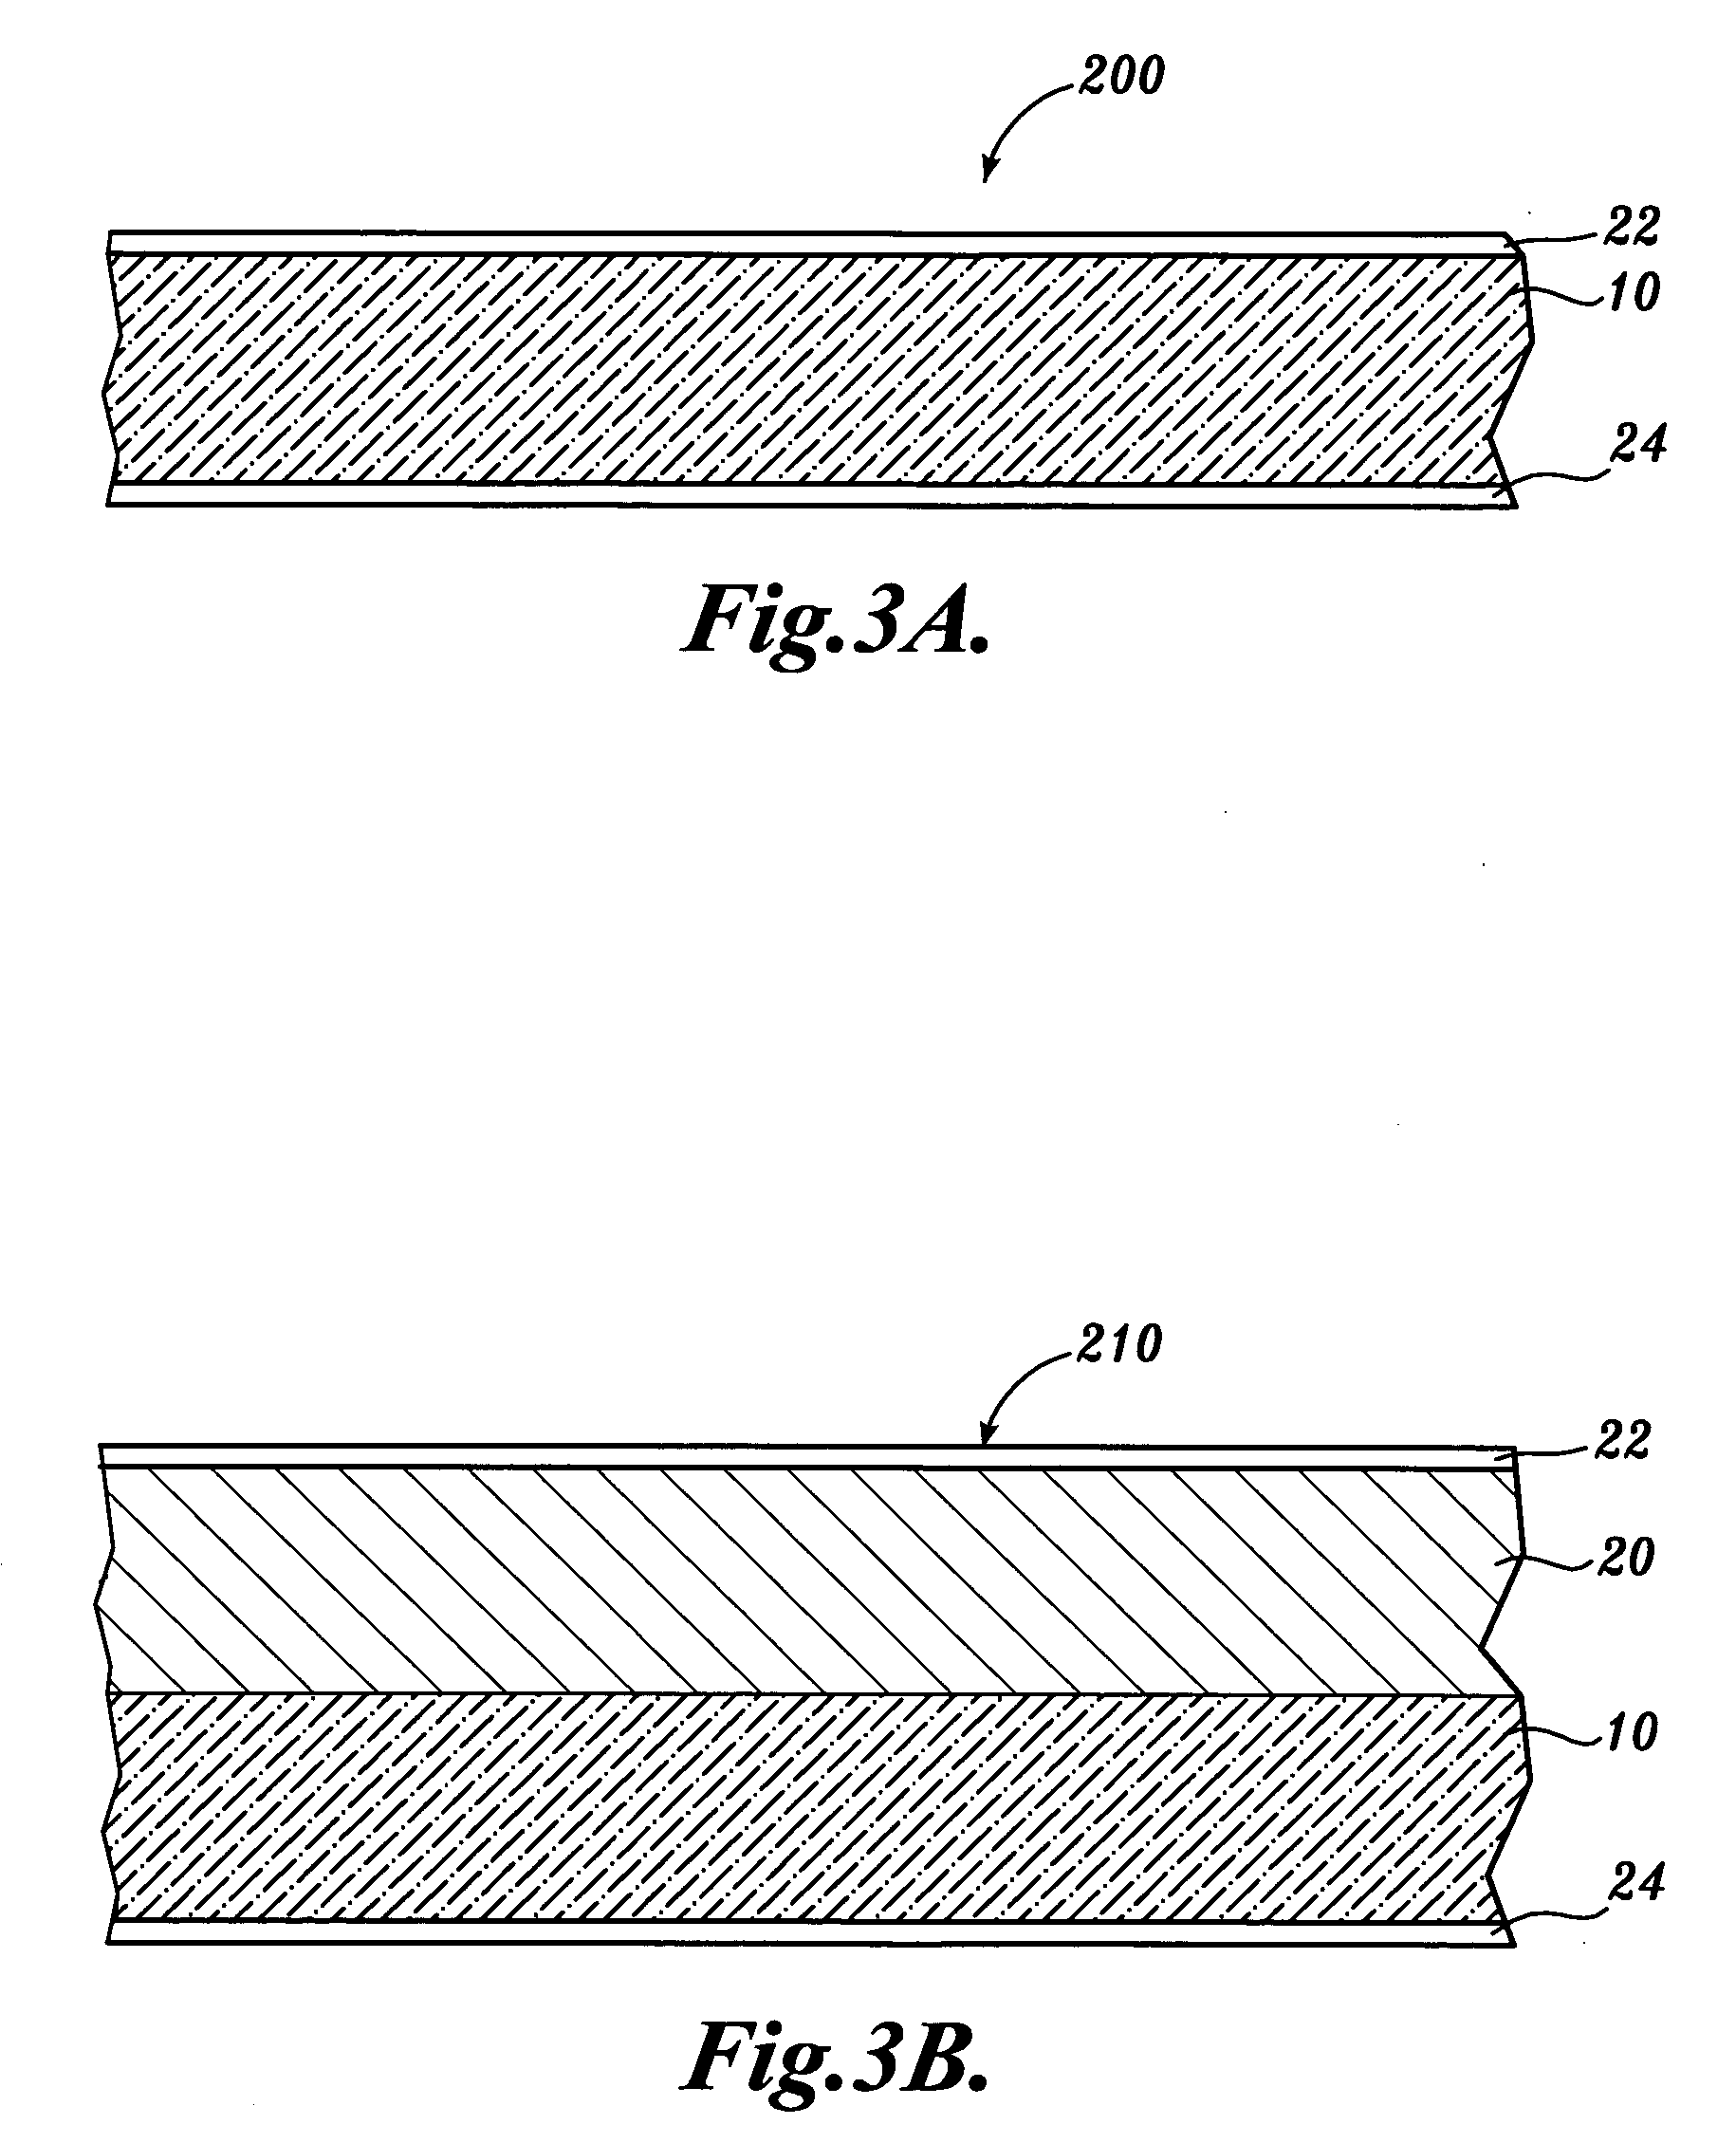 Method for making sulfoalkylated cellulose polymer network